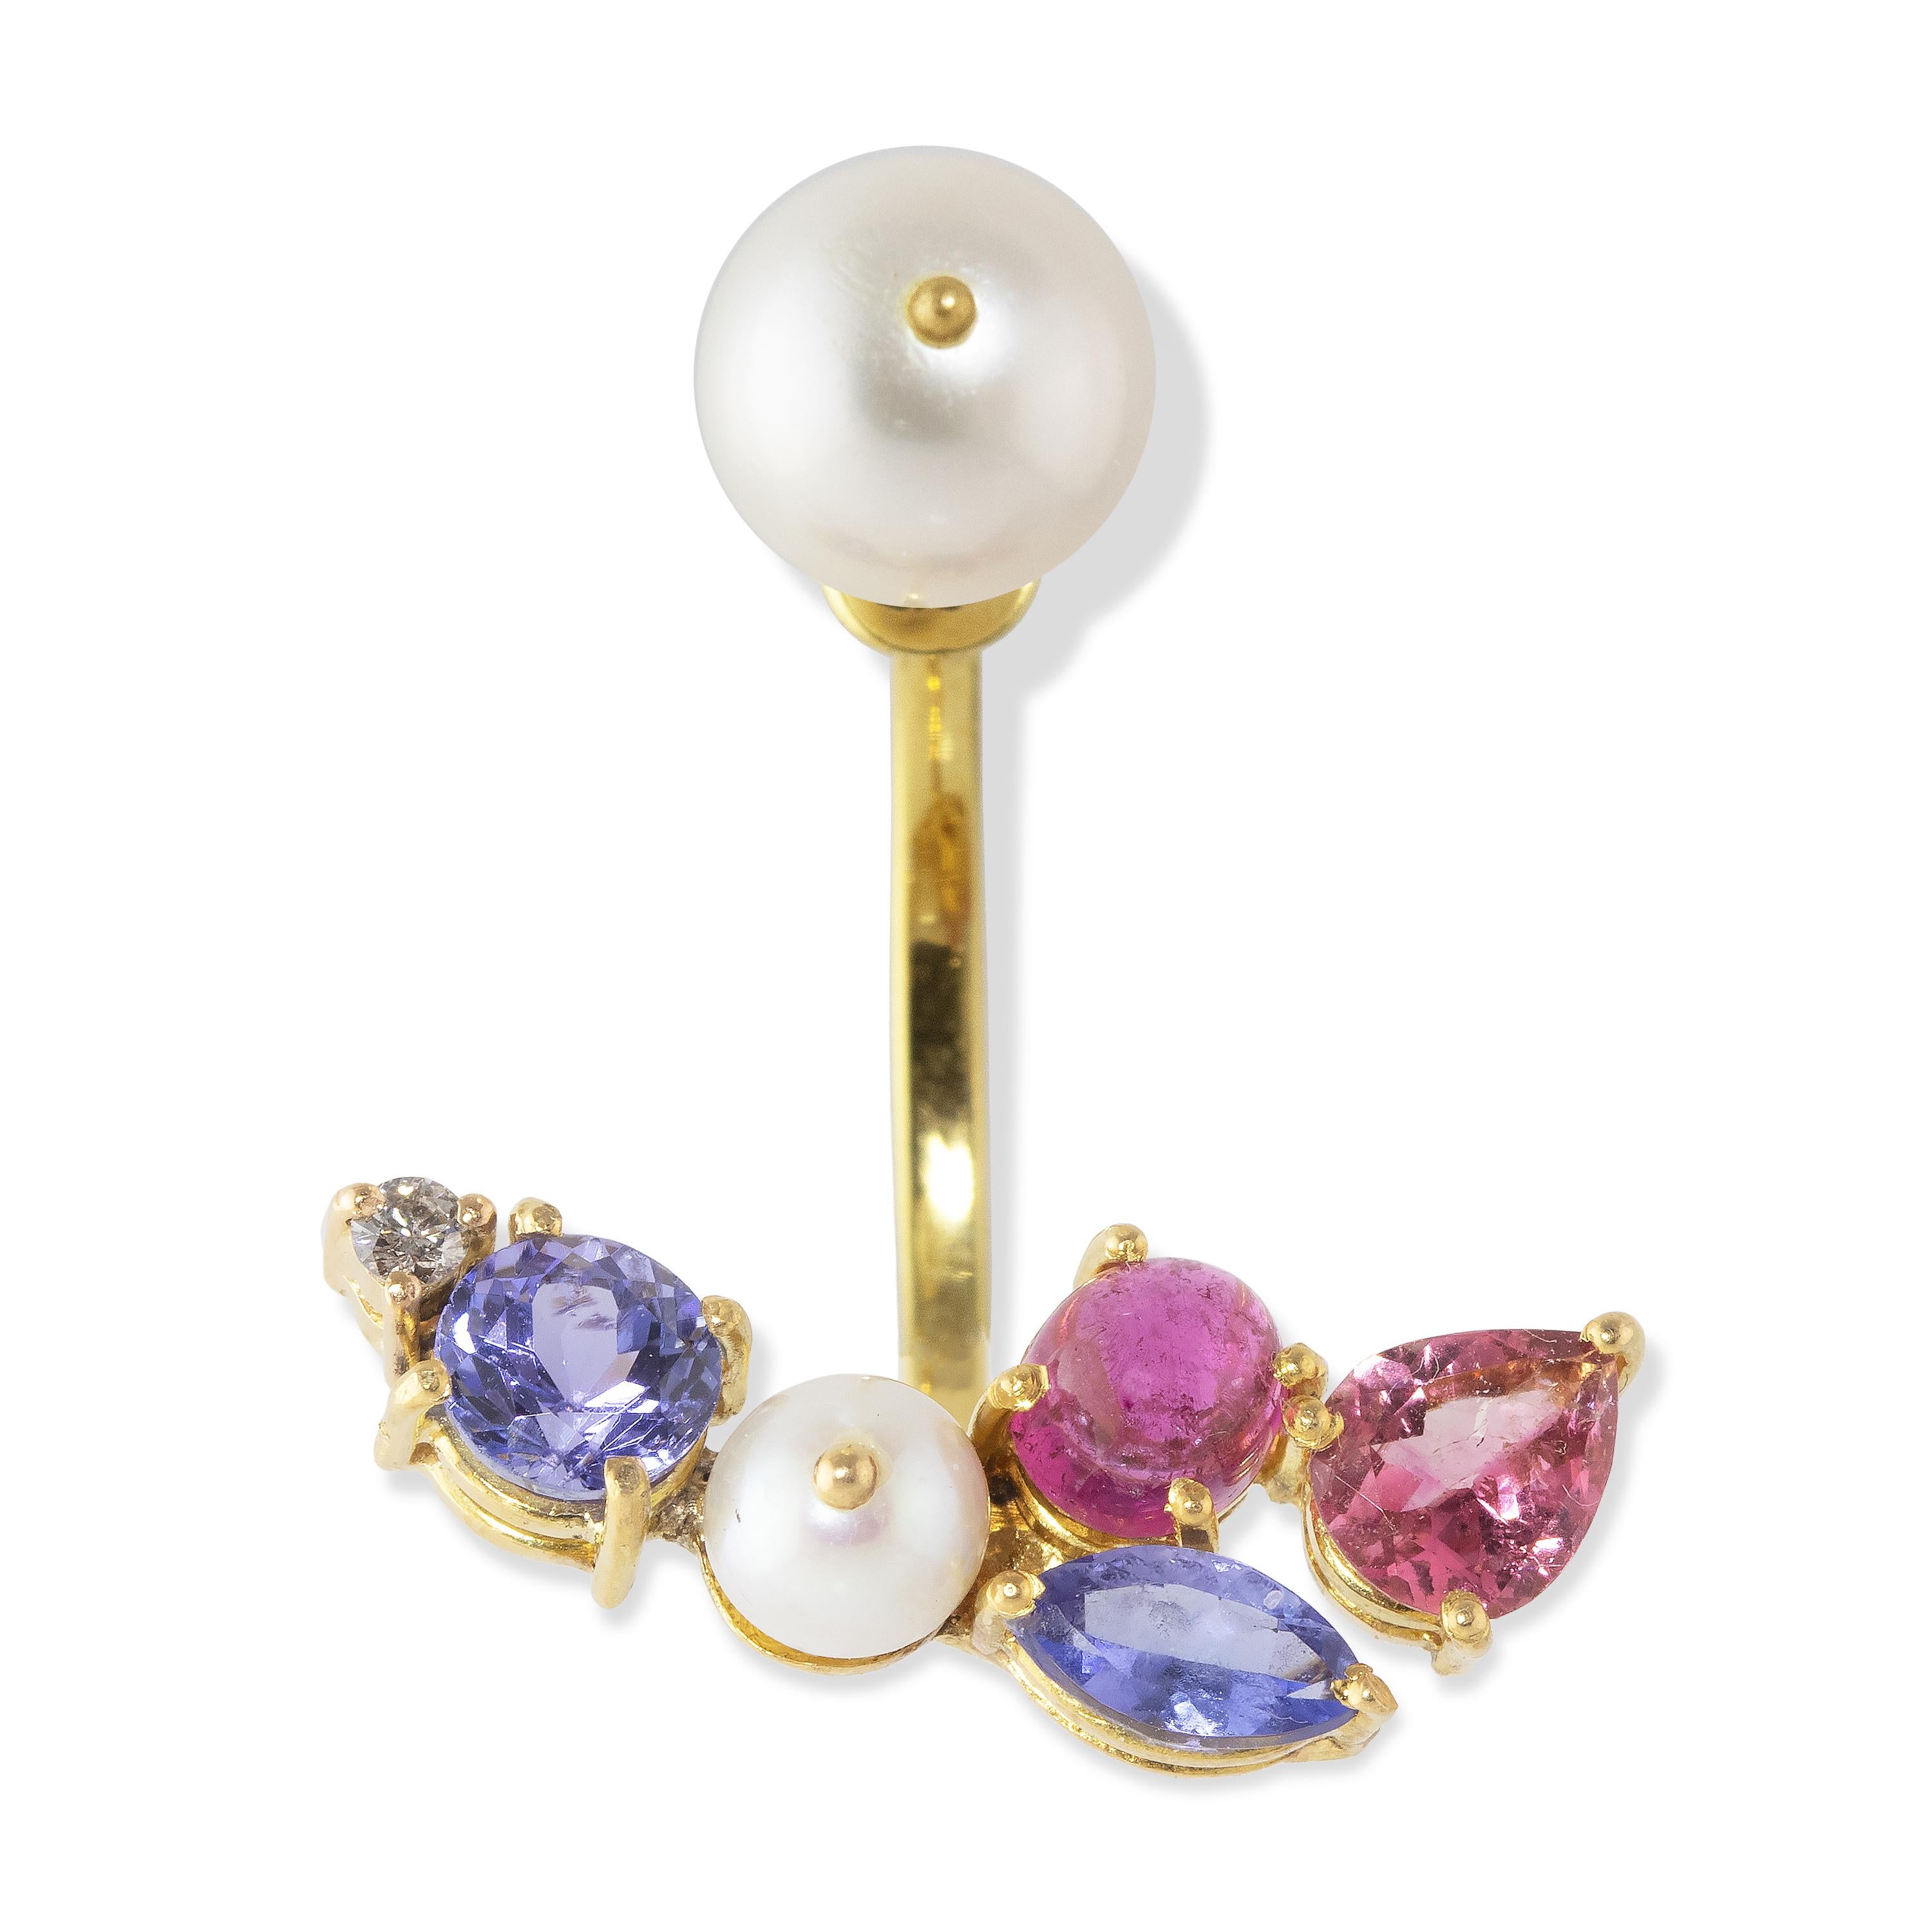 Dramatic and elegant Floating Pearl Drop Earring. Formed into an arc to follow the curve of the ear, this 18k earring features a screw pearl top with pink tourmalines, tanzanites, Akoya pearls and a diamond accent. 
To wear layered with other